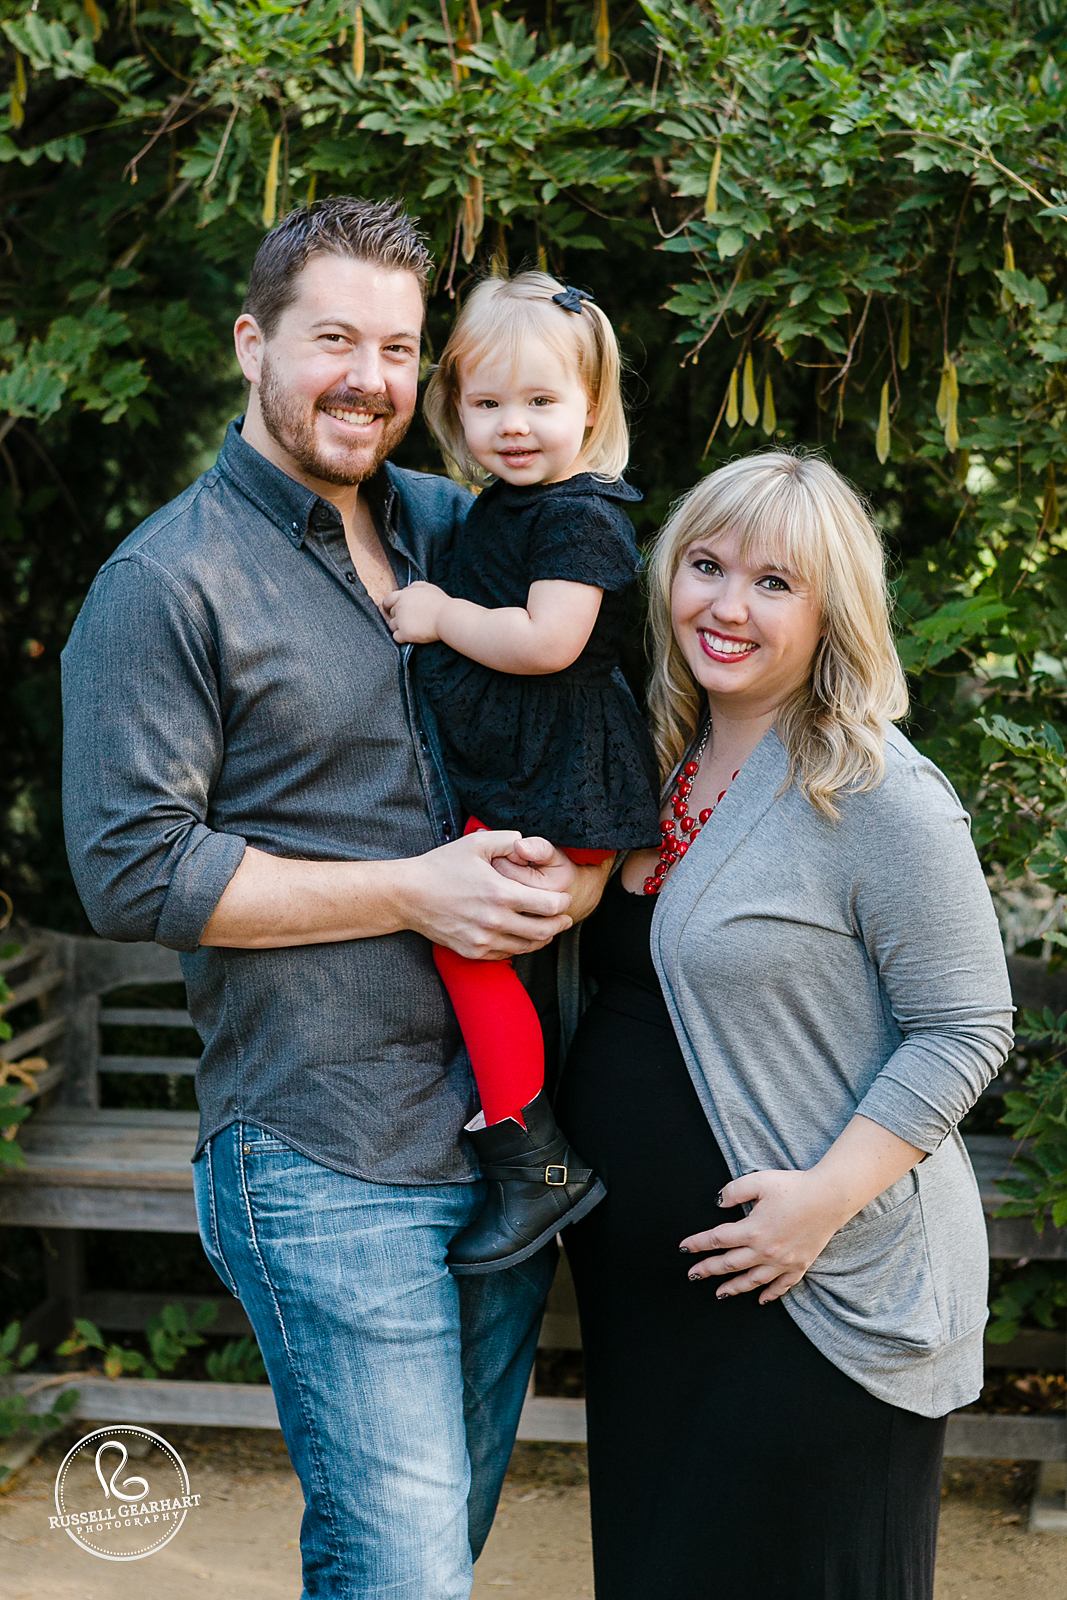 Pasadena Family Portrait: Goyette Family – Russell Gearhart Photography – www.gearhartphoto.com